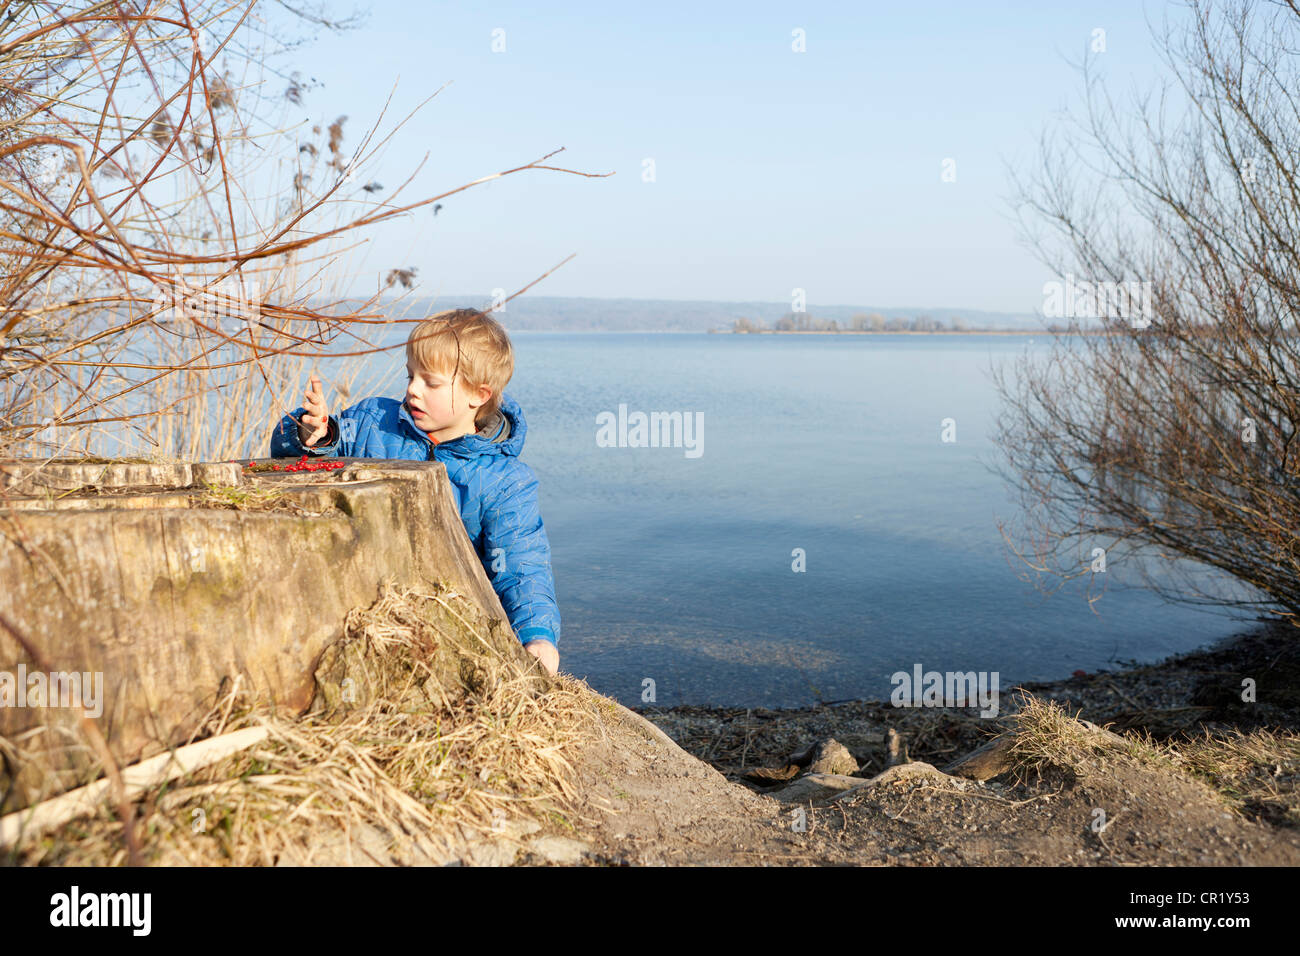 Boy playing with berries by lake Stock Photo